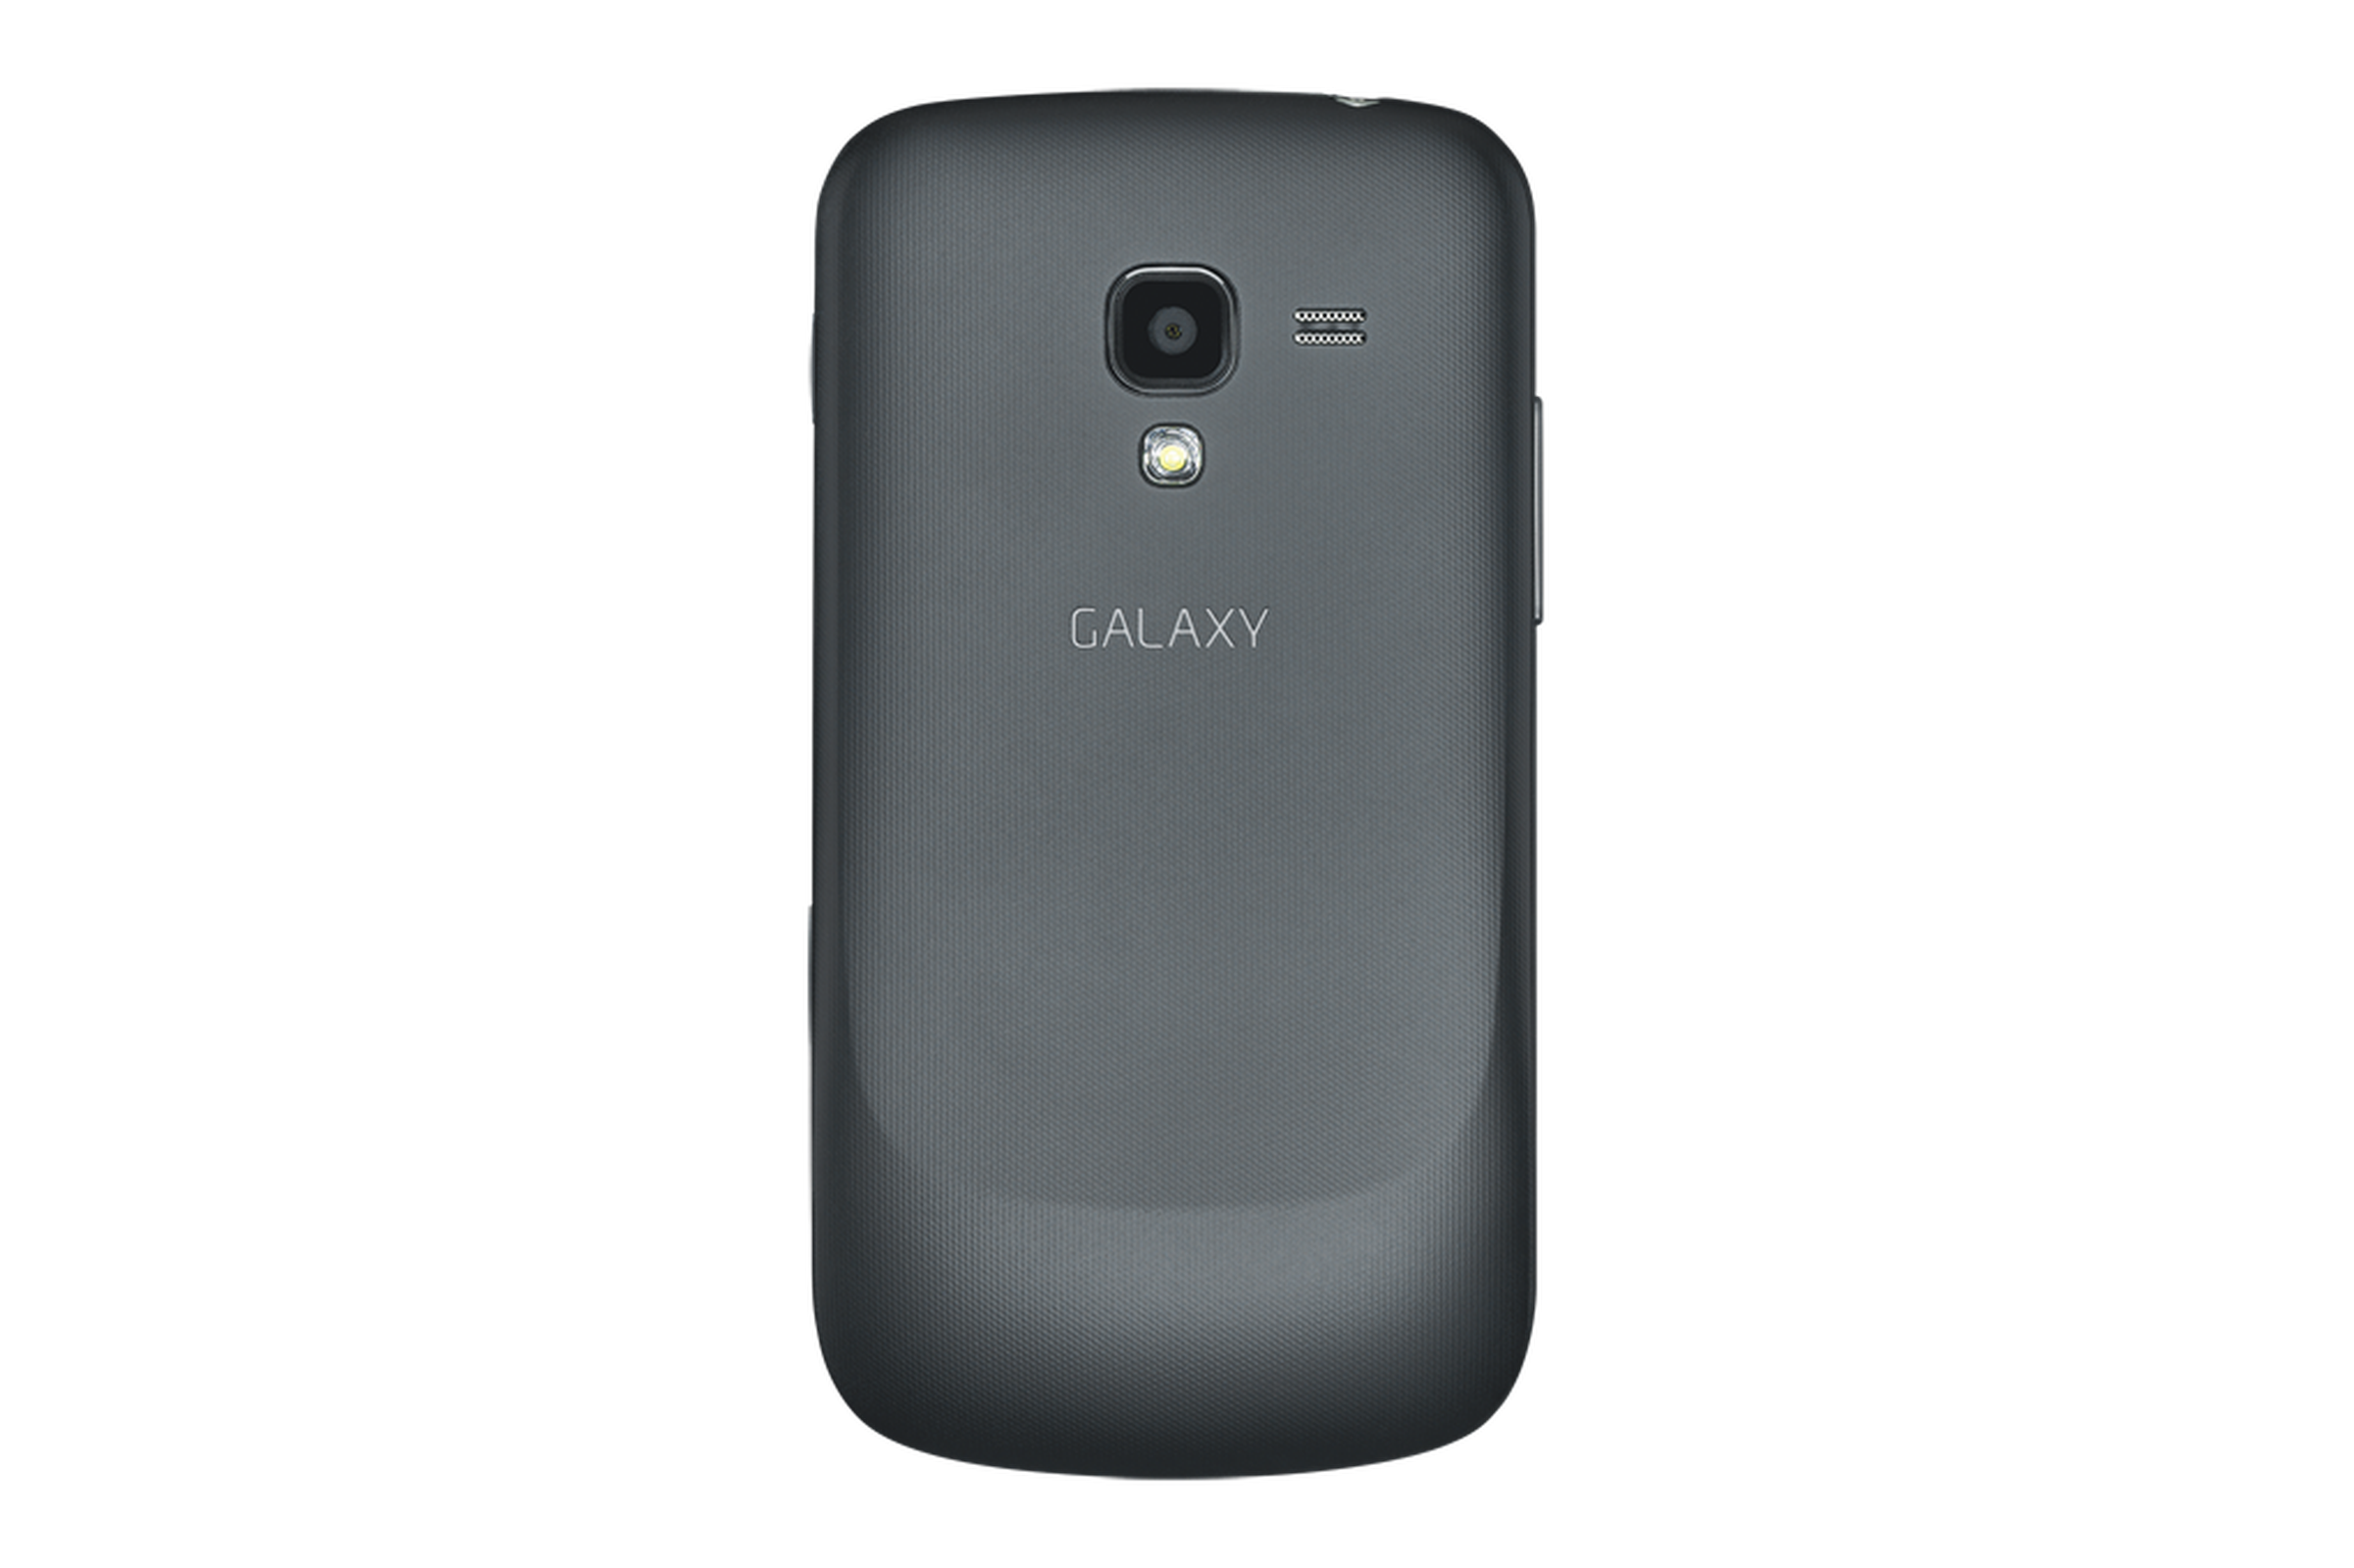 Samsung Galaxy Exhilarate press pictures